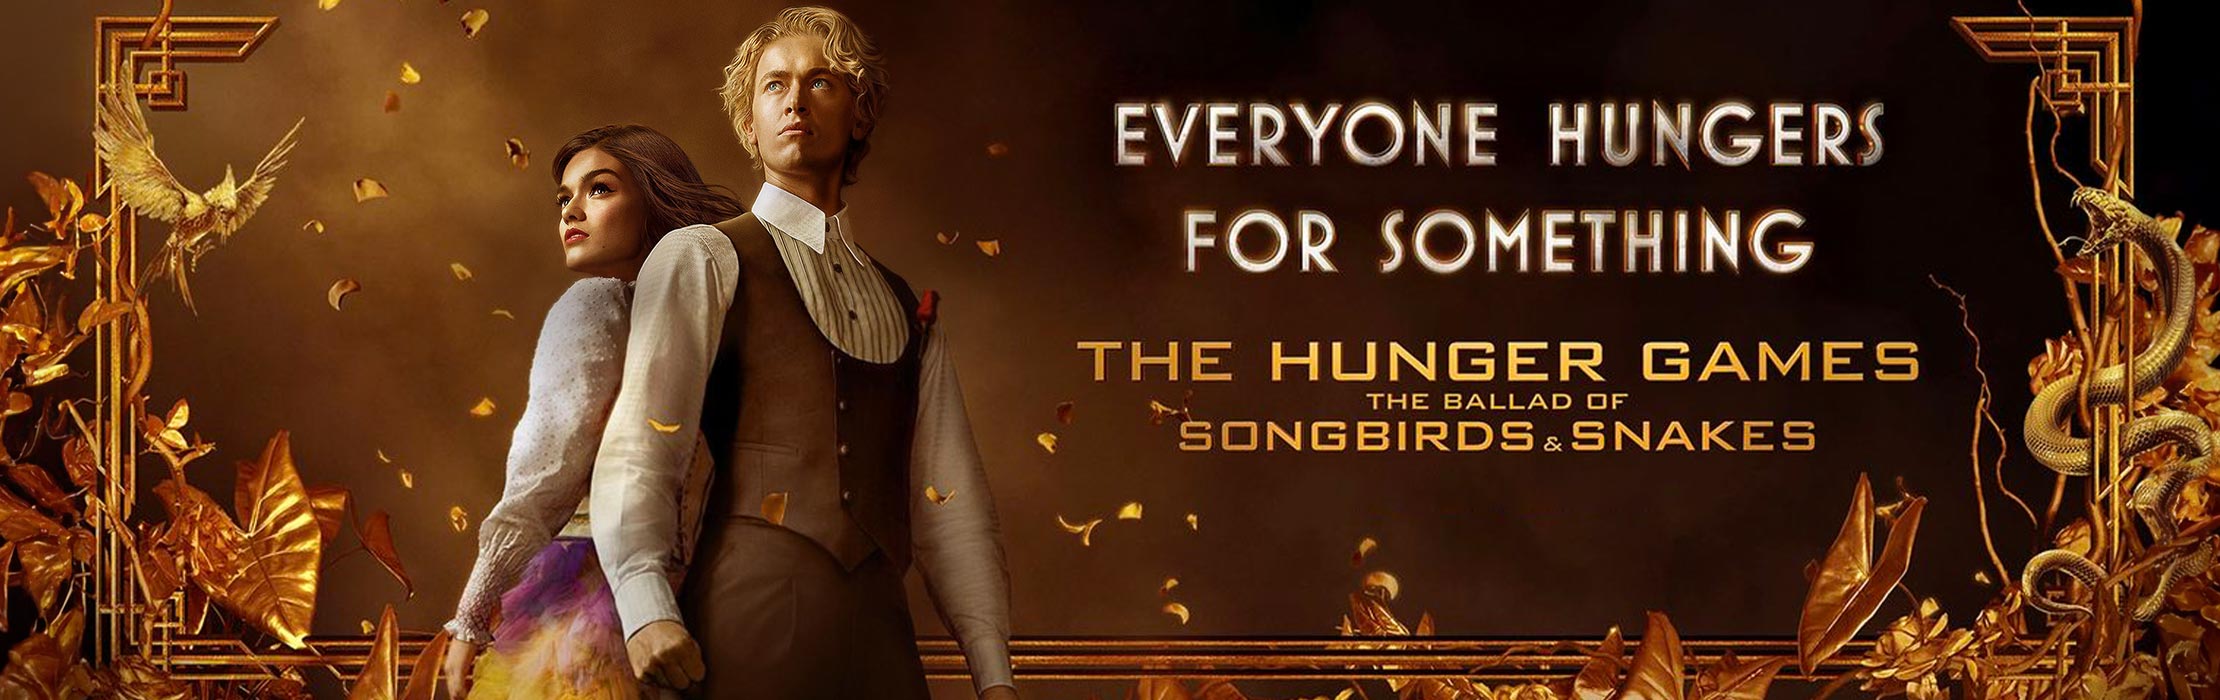 The Hunger Games: The Ballad of Songbirds Snakes